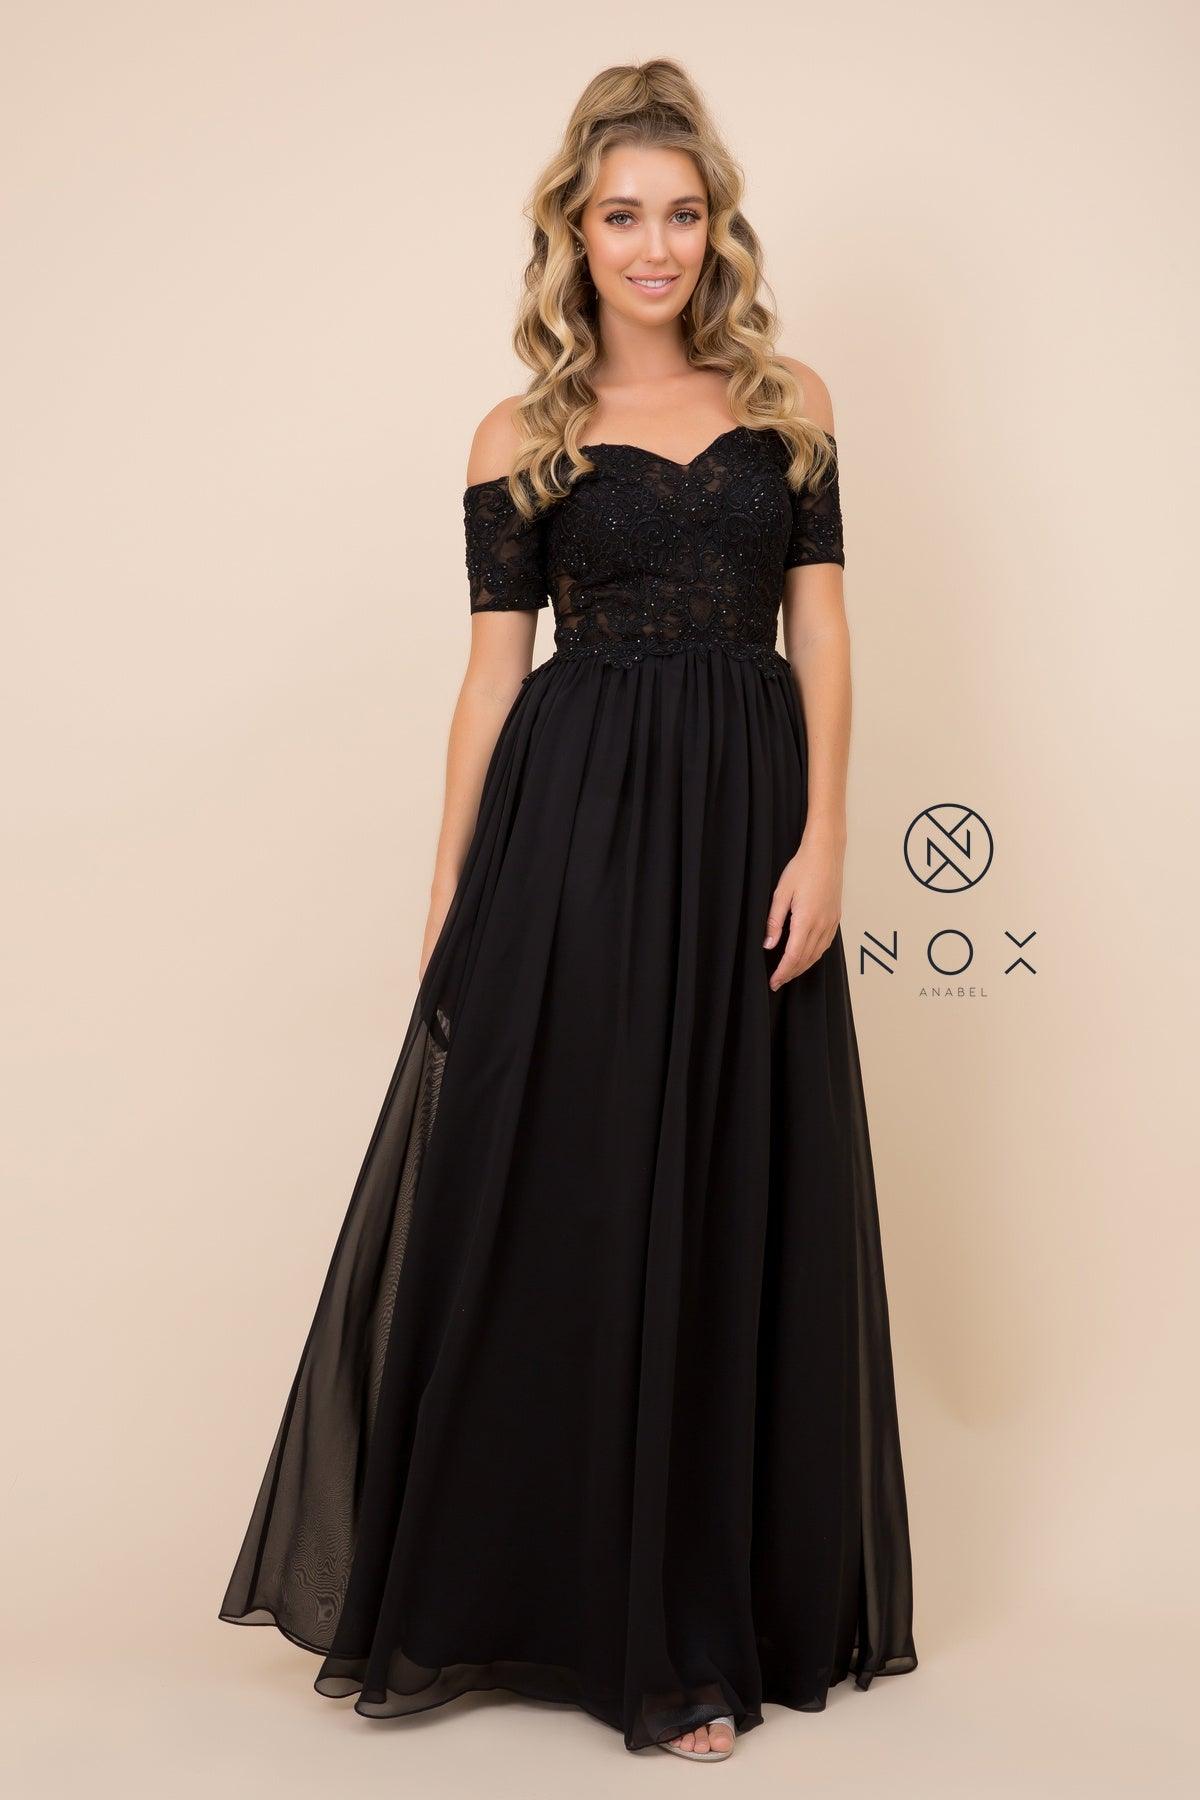 Long Off The Shoulder Prom Dress - The Dress Outlet Nox Anabel